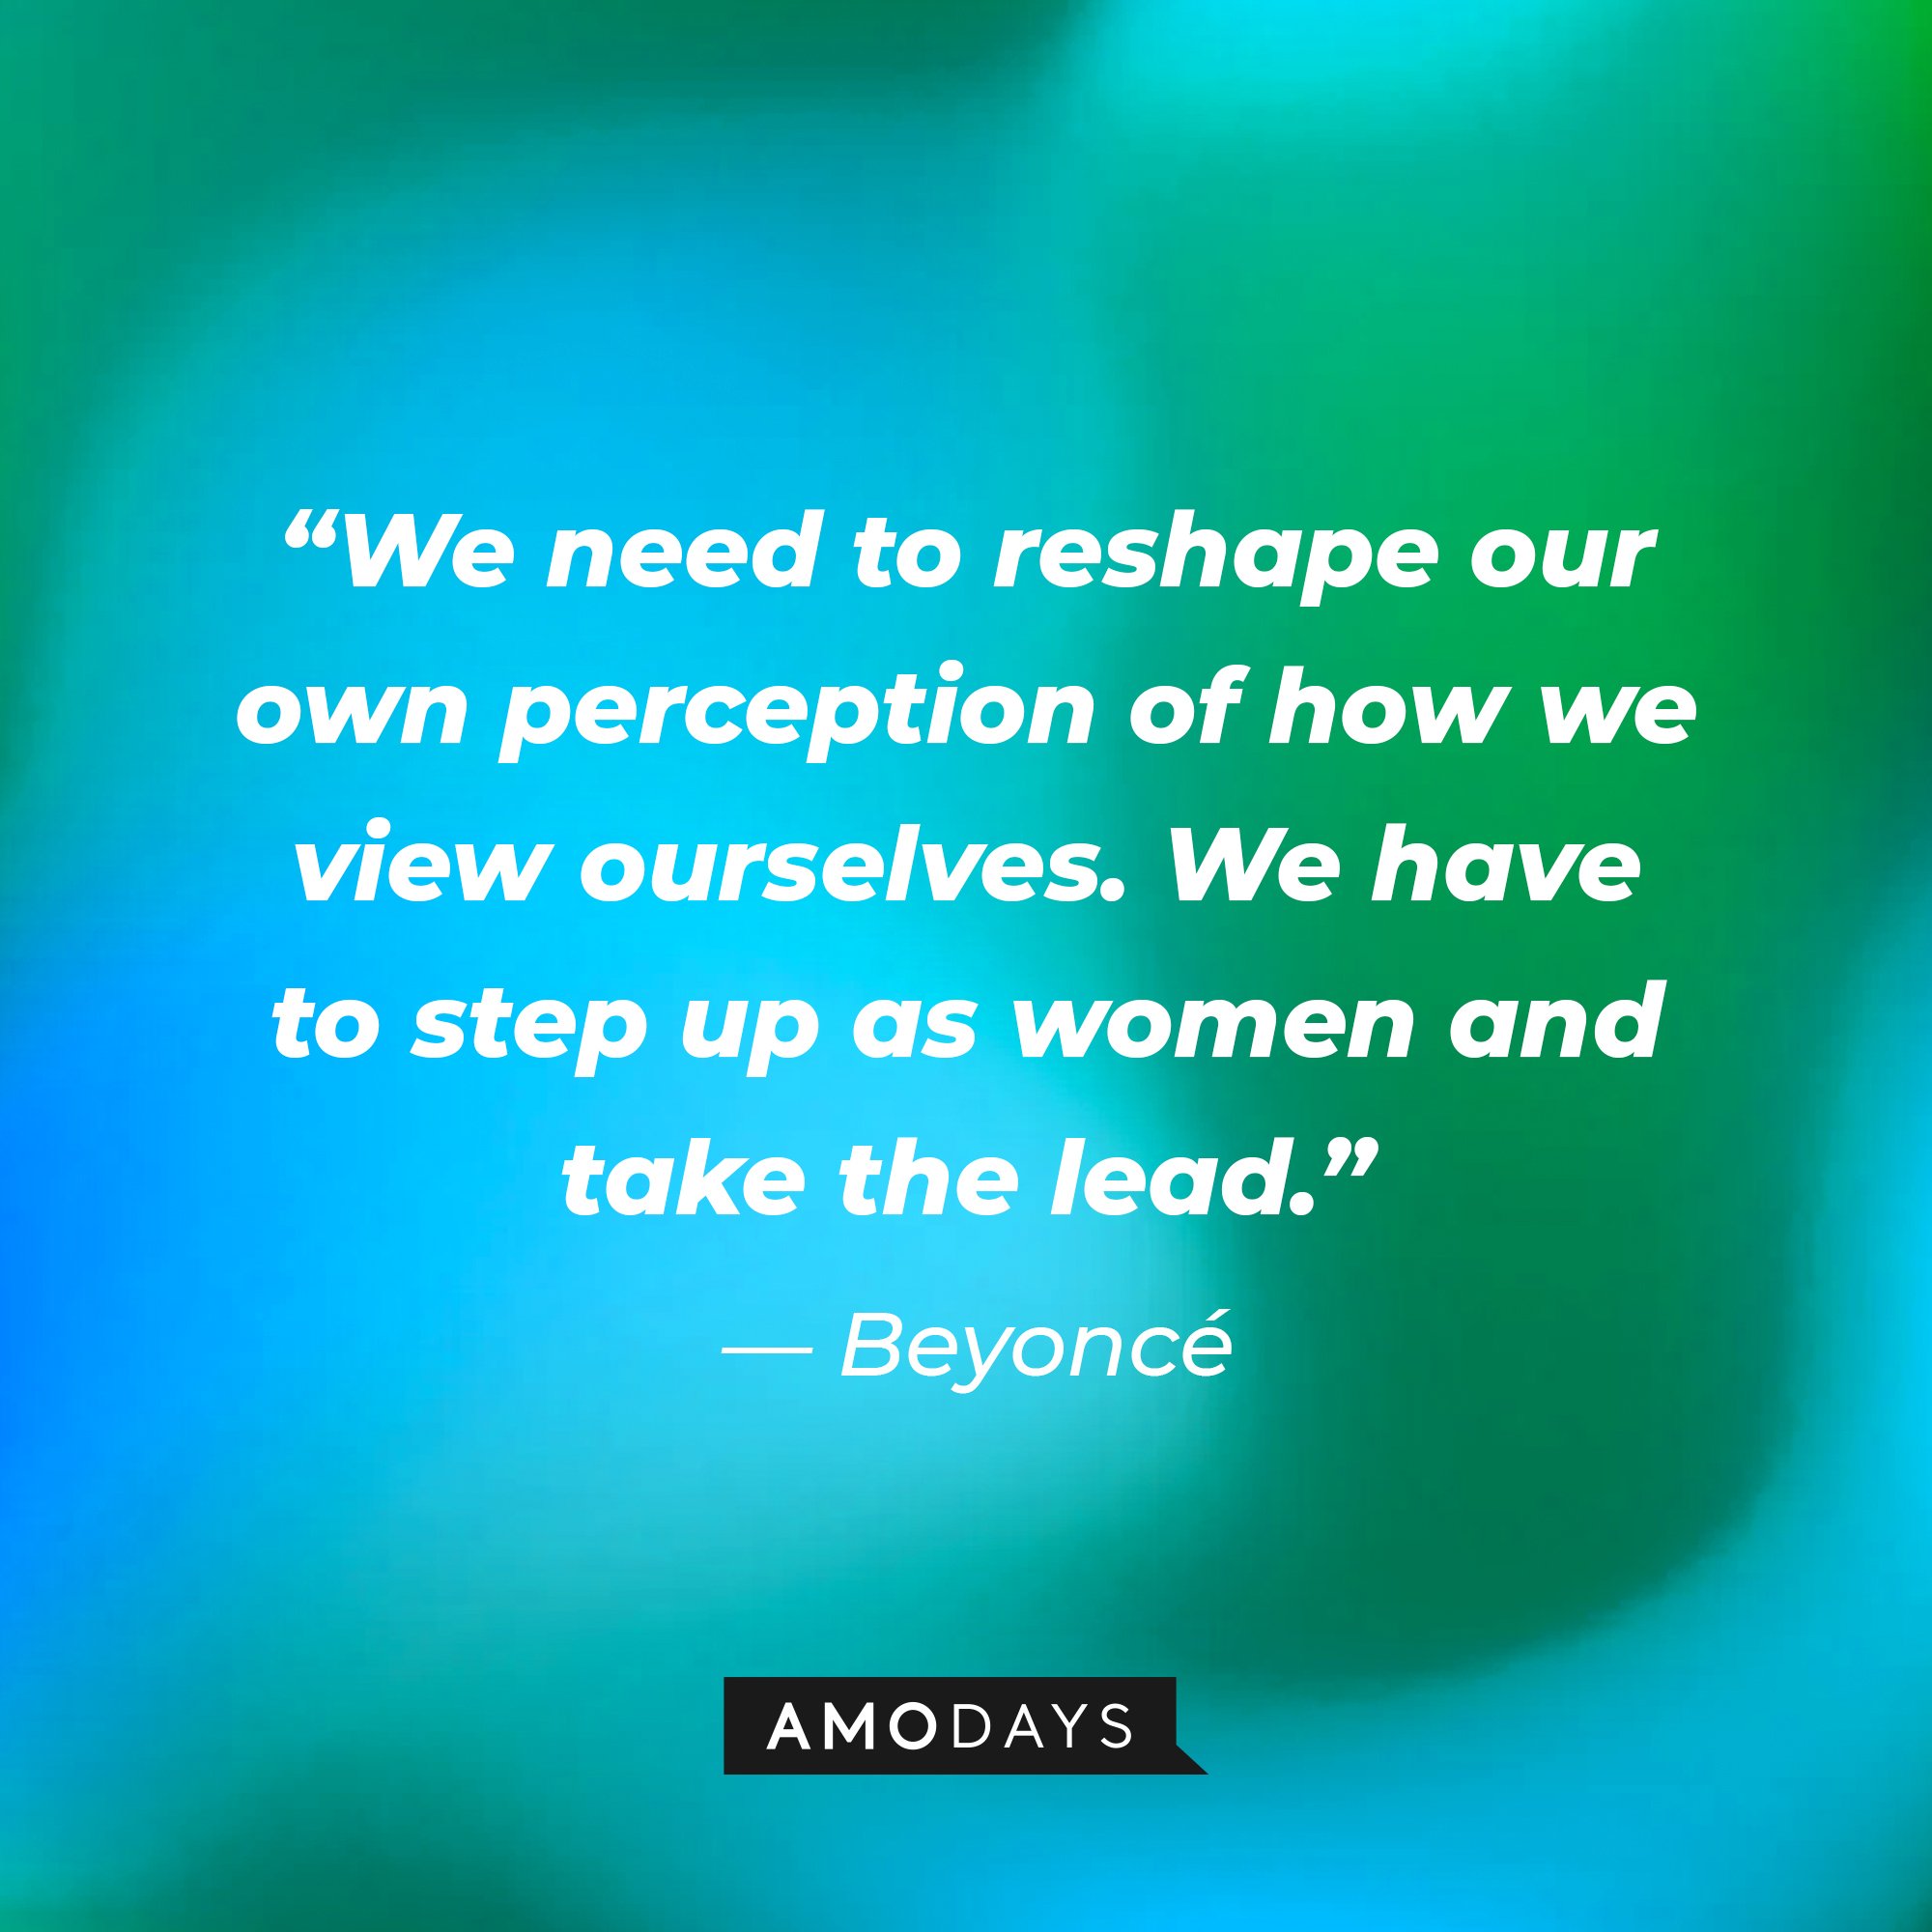 Beyoncé’s quote “We need to reshape our own perception of how we view ourselves. We have to step up as women and take the lead.” | Image: AmoDays